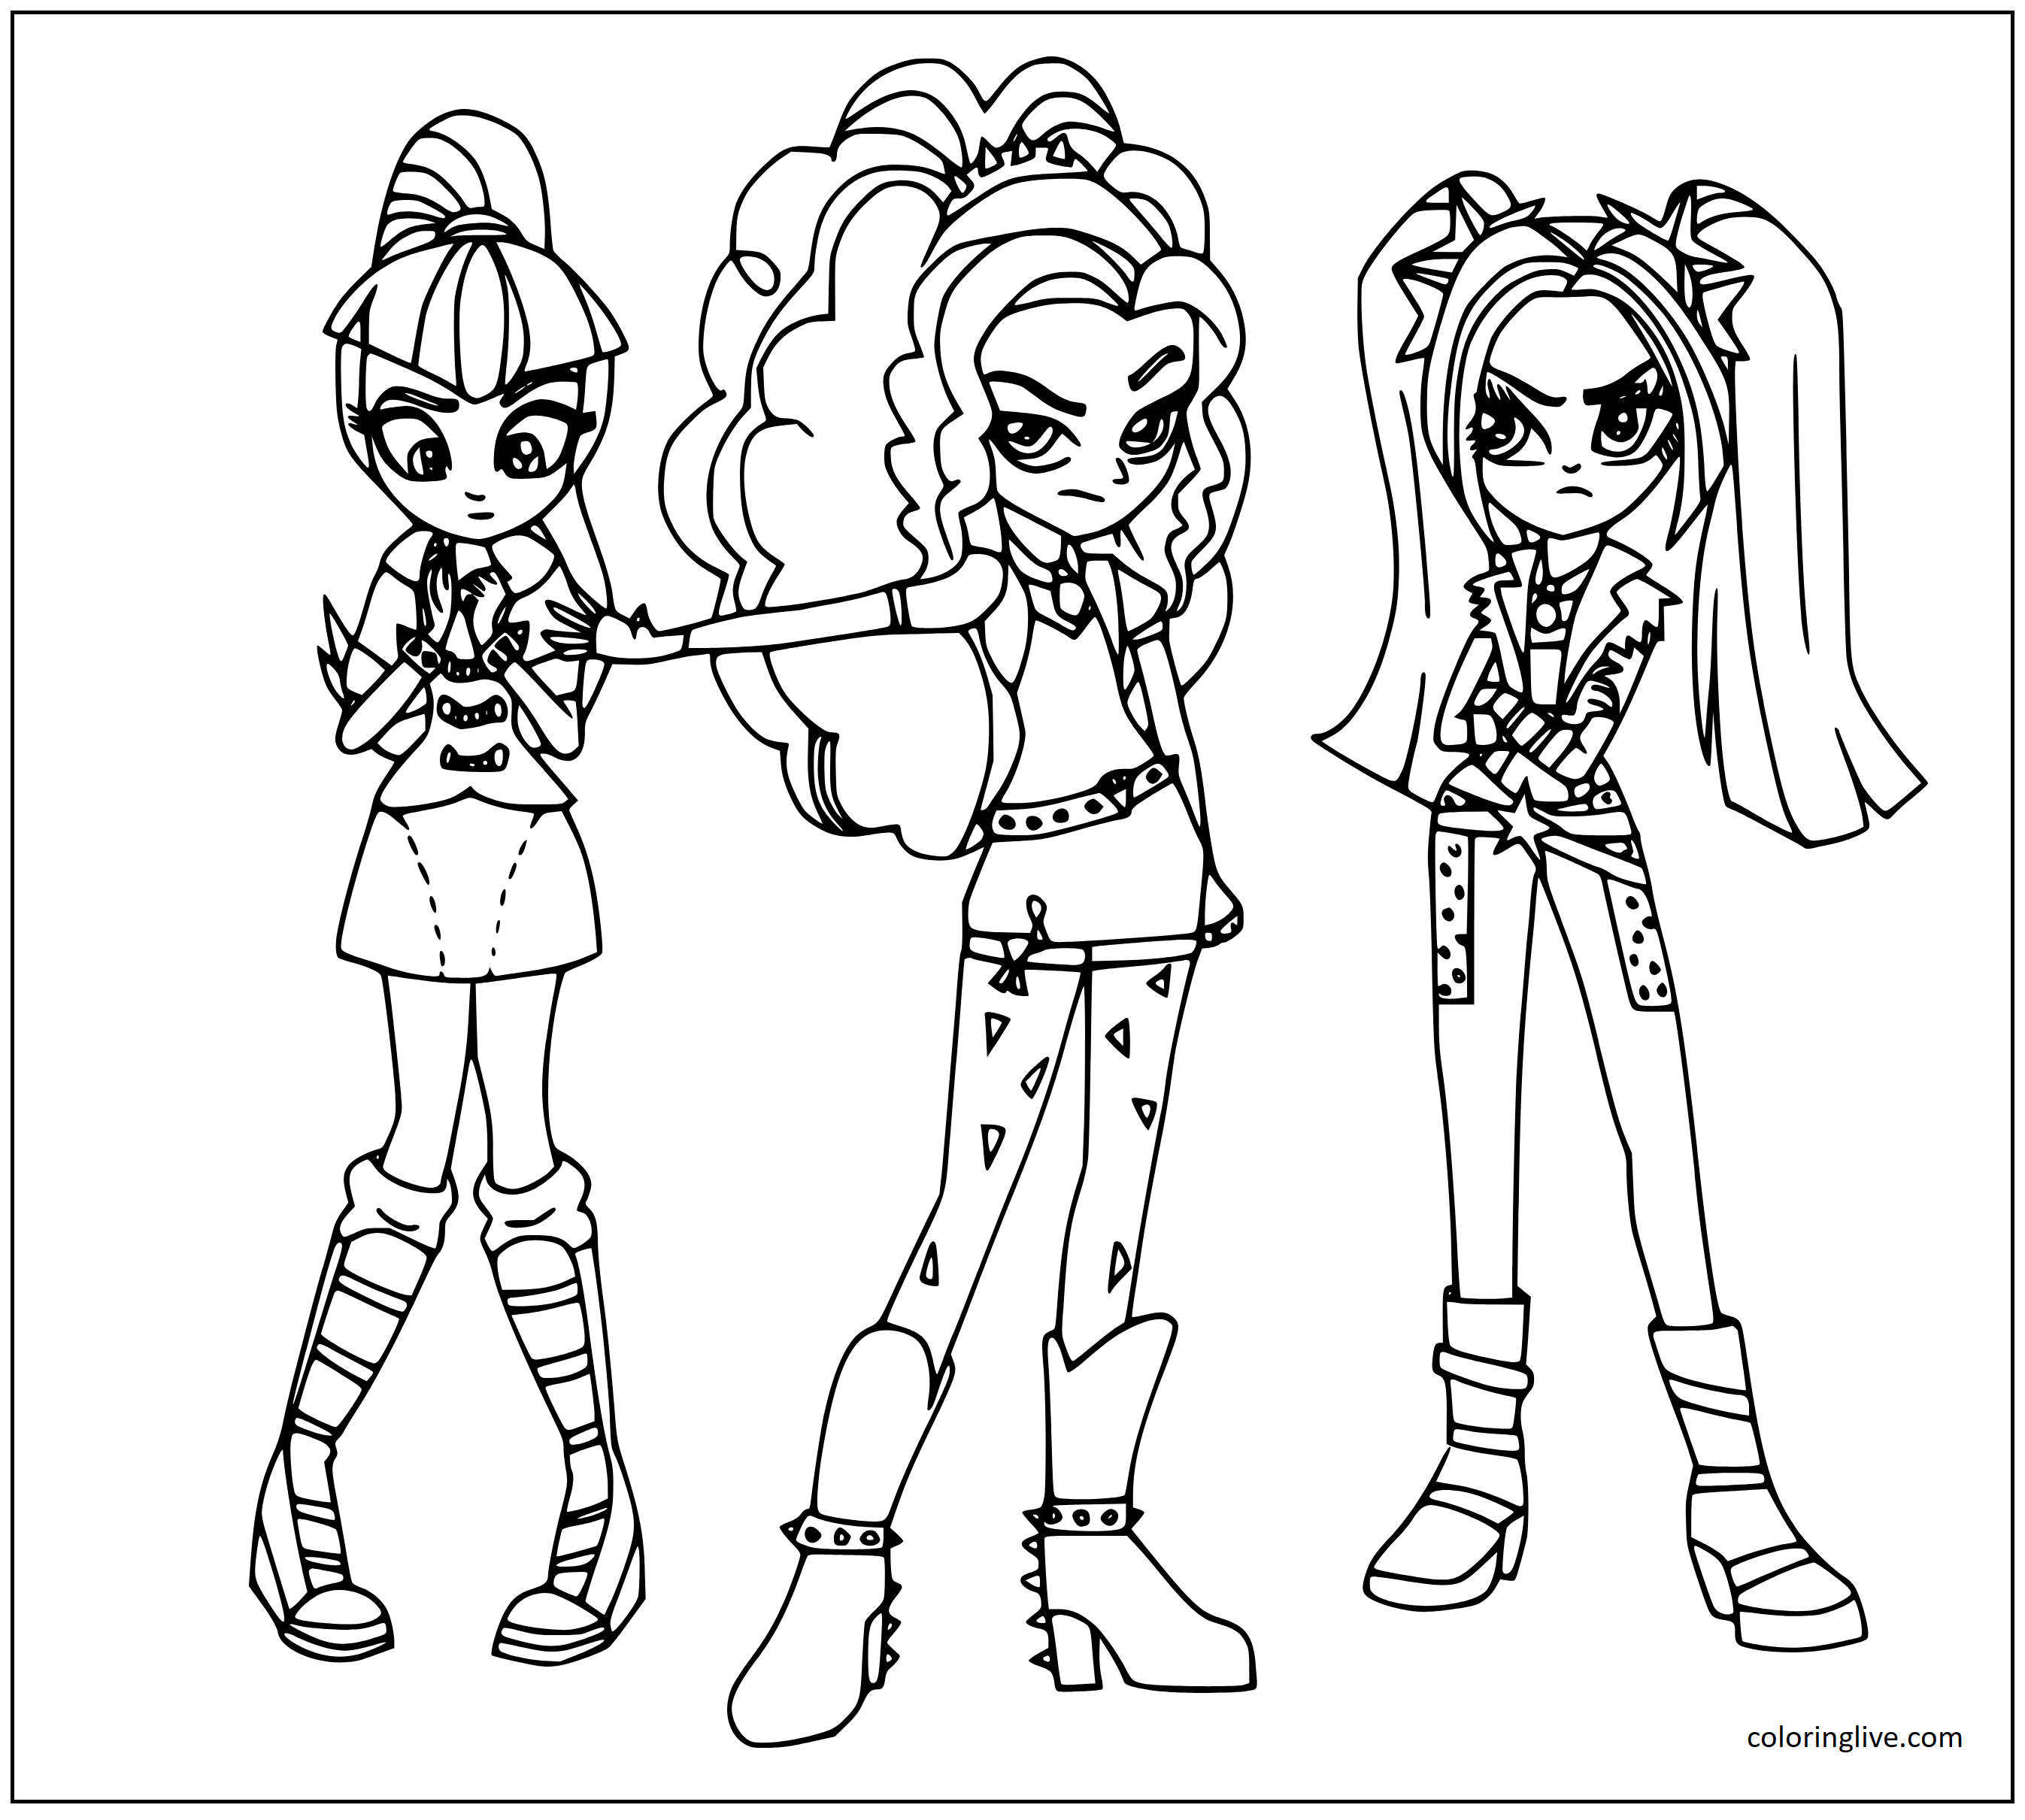 Printable Equestria Girls  sheet Coloring Page for kids.